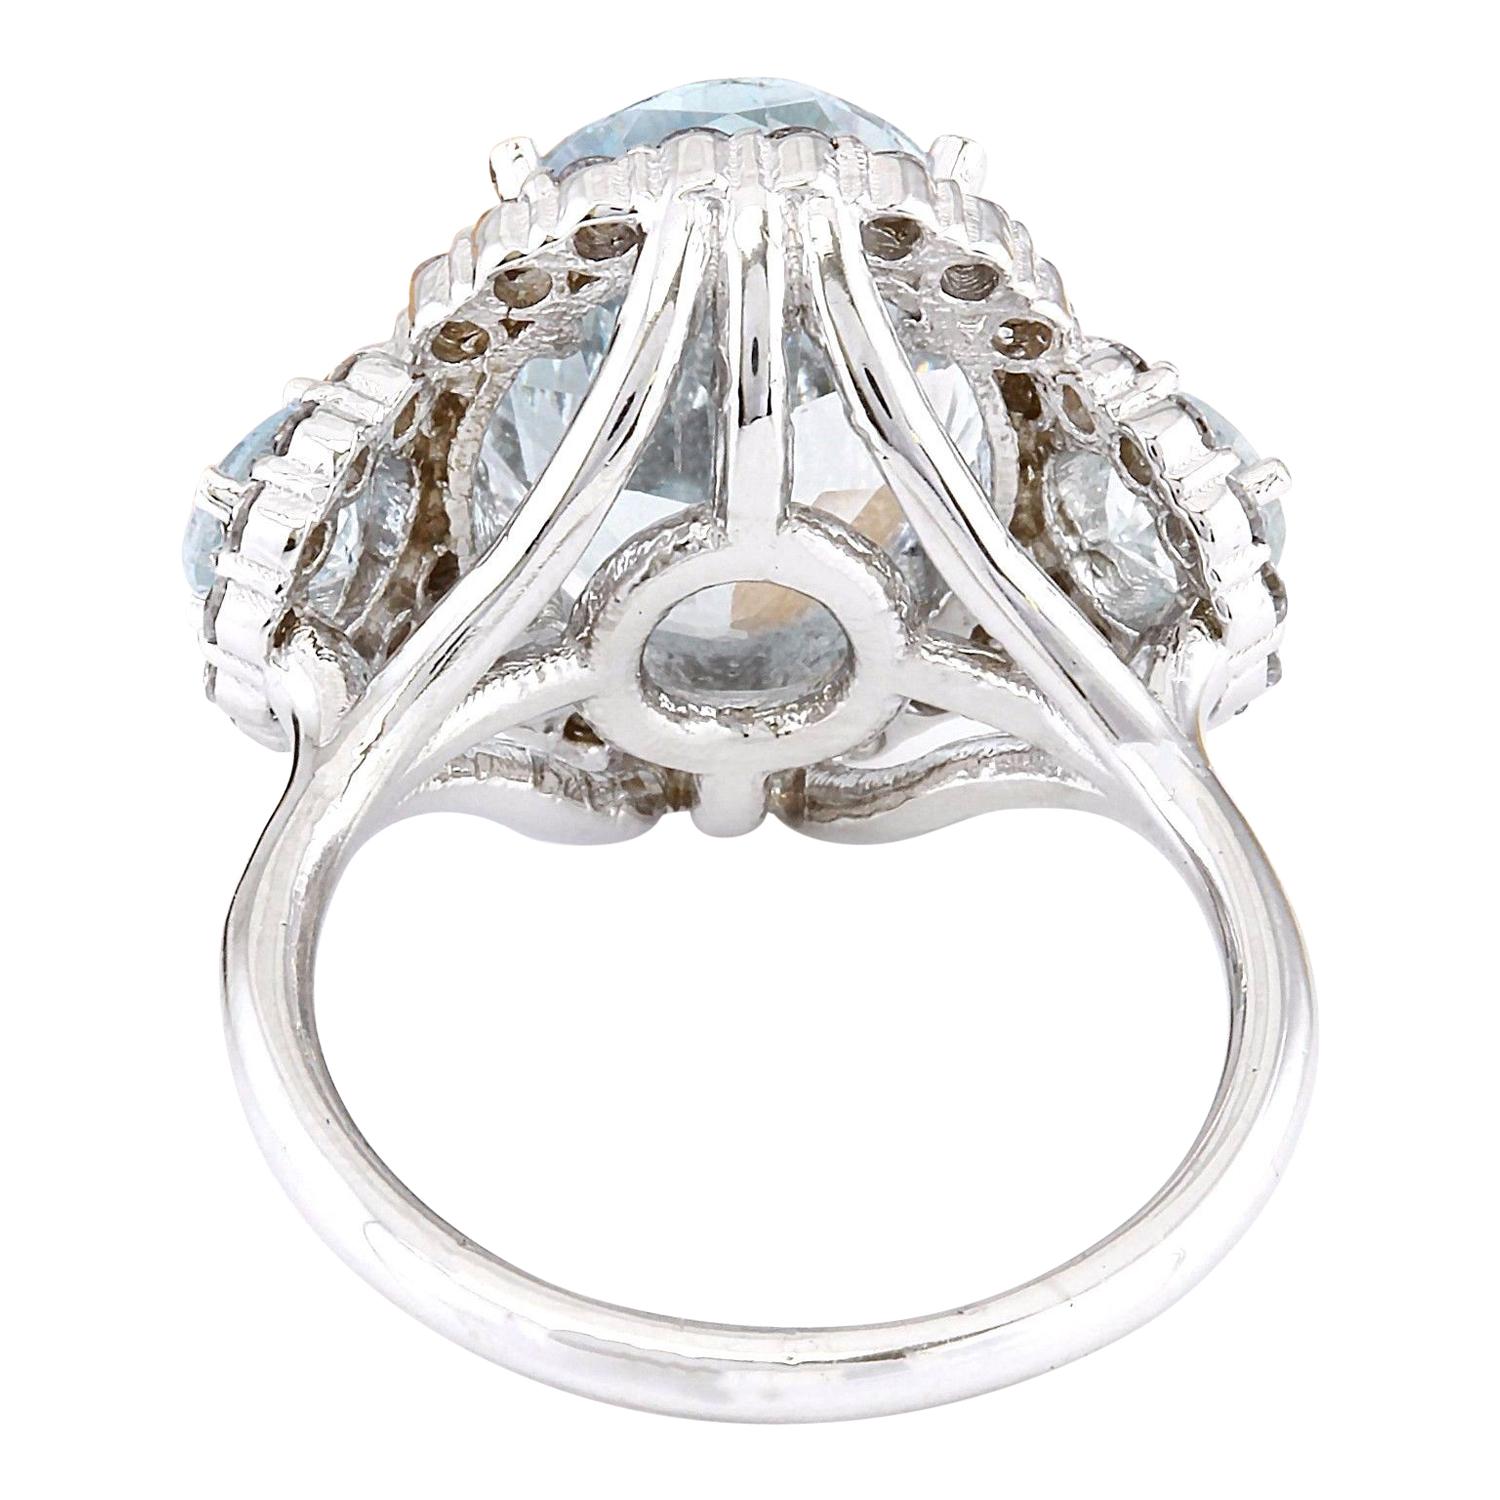 Oval Cut Aquamarine Diamond Ring In 14 Karat Solid White Gold  For Sale